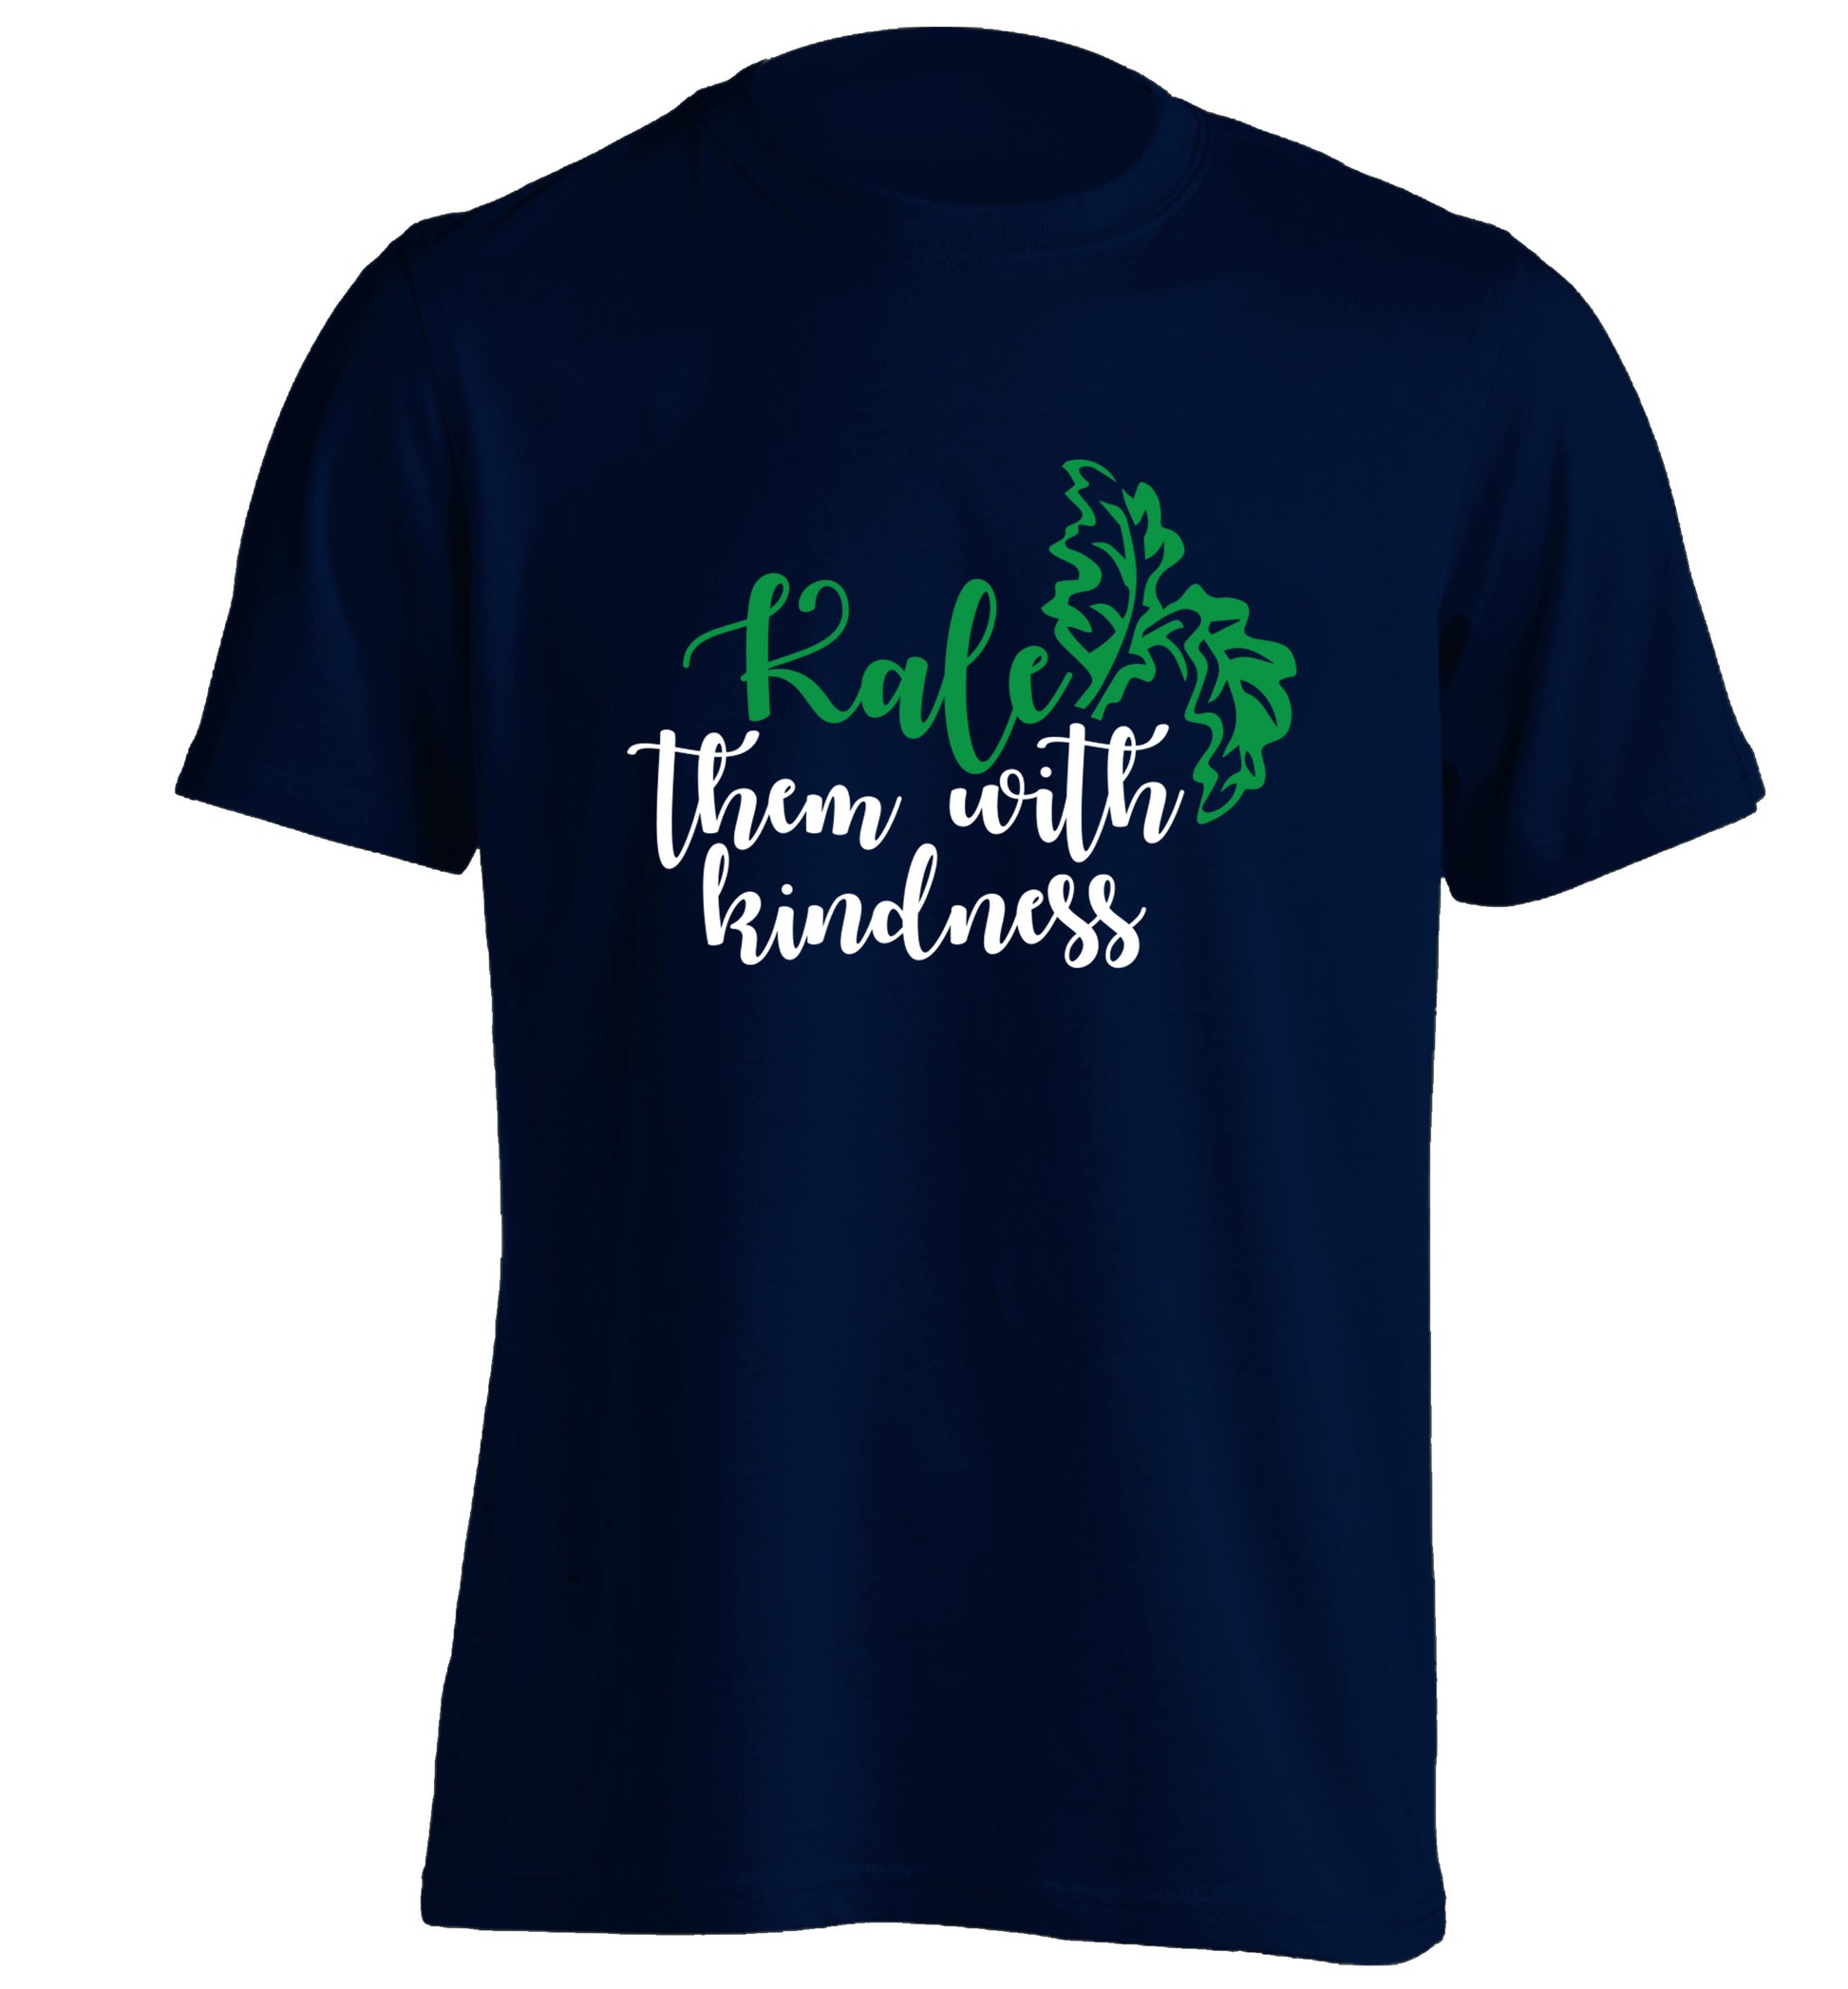 Kale them with kindness adults unisex navy Tshirt 2XL